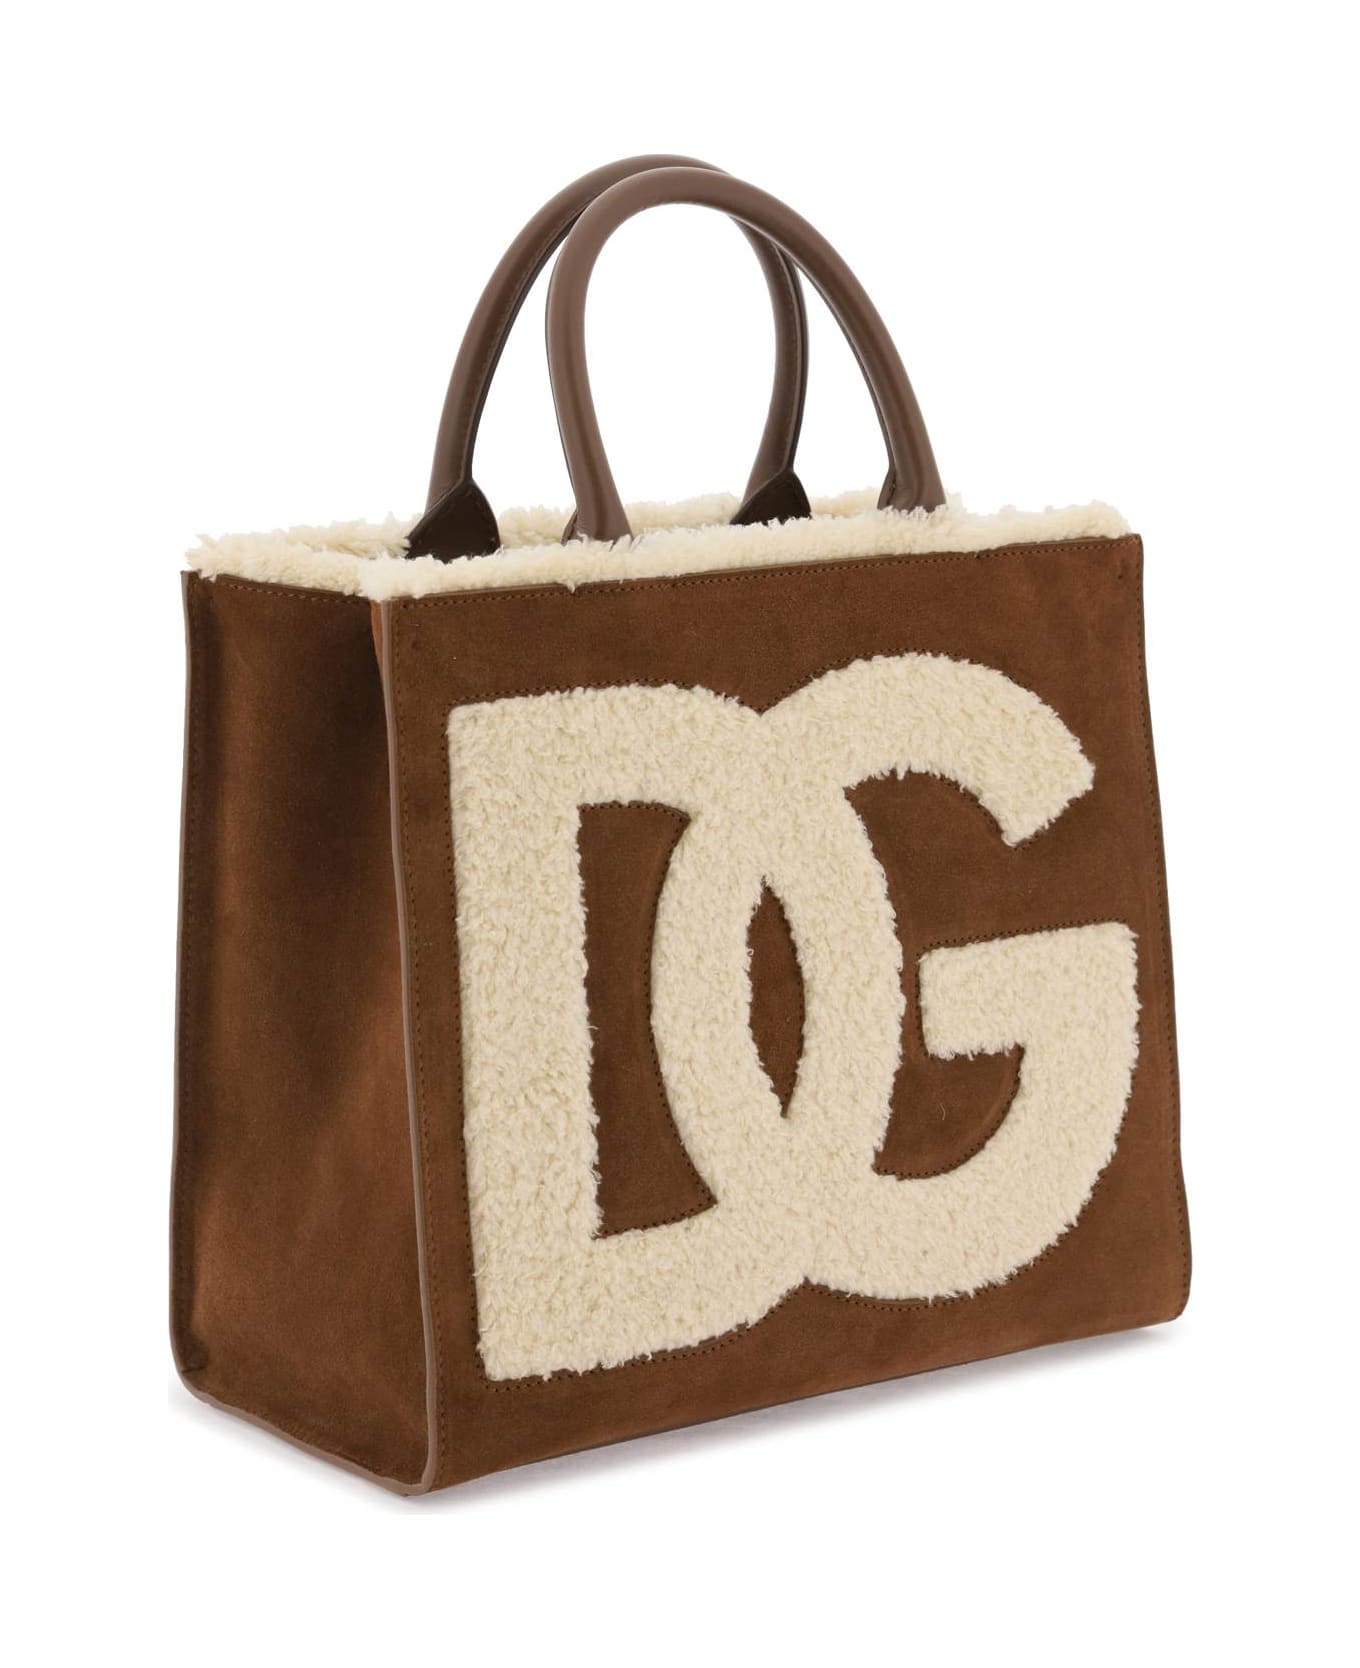 Dolce & Gabbana Daily Shopping Bag With Maxi Logo - brown トートバッグ